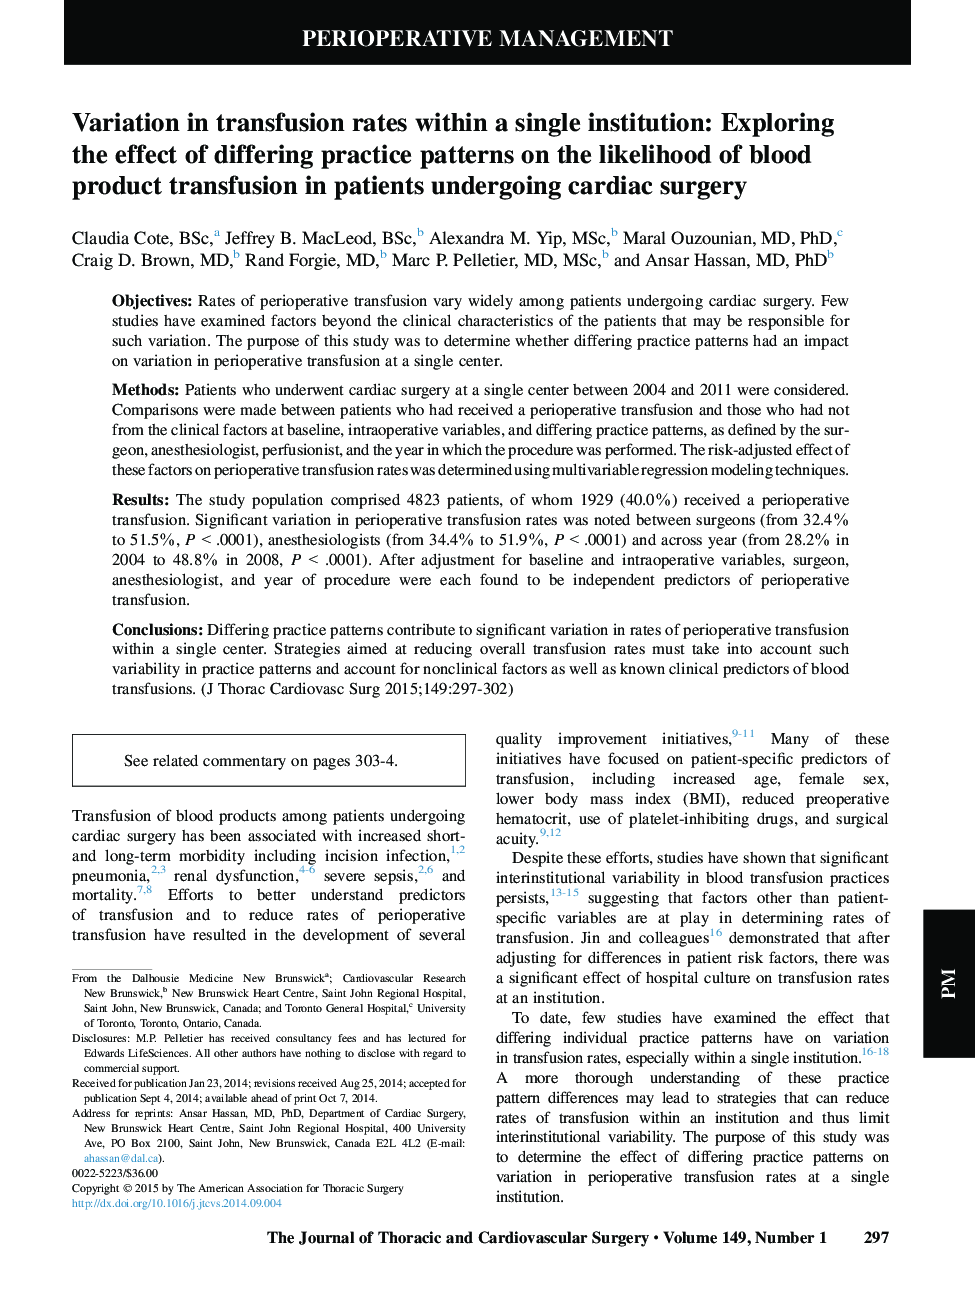 Variation in transfusion rates within a single institution: Exploring the effect of differing practice patterns on the likelihood of blood product transfusion in patients undergoing cardiac surgery